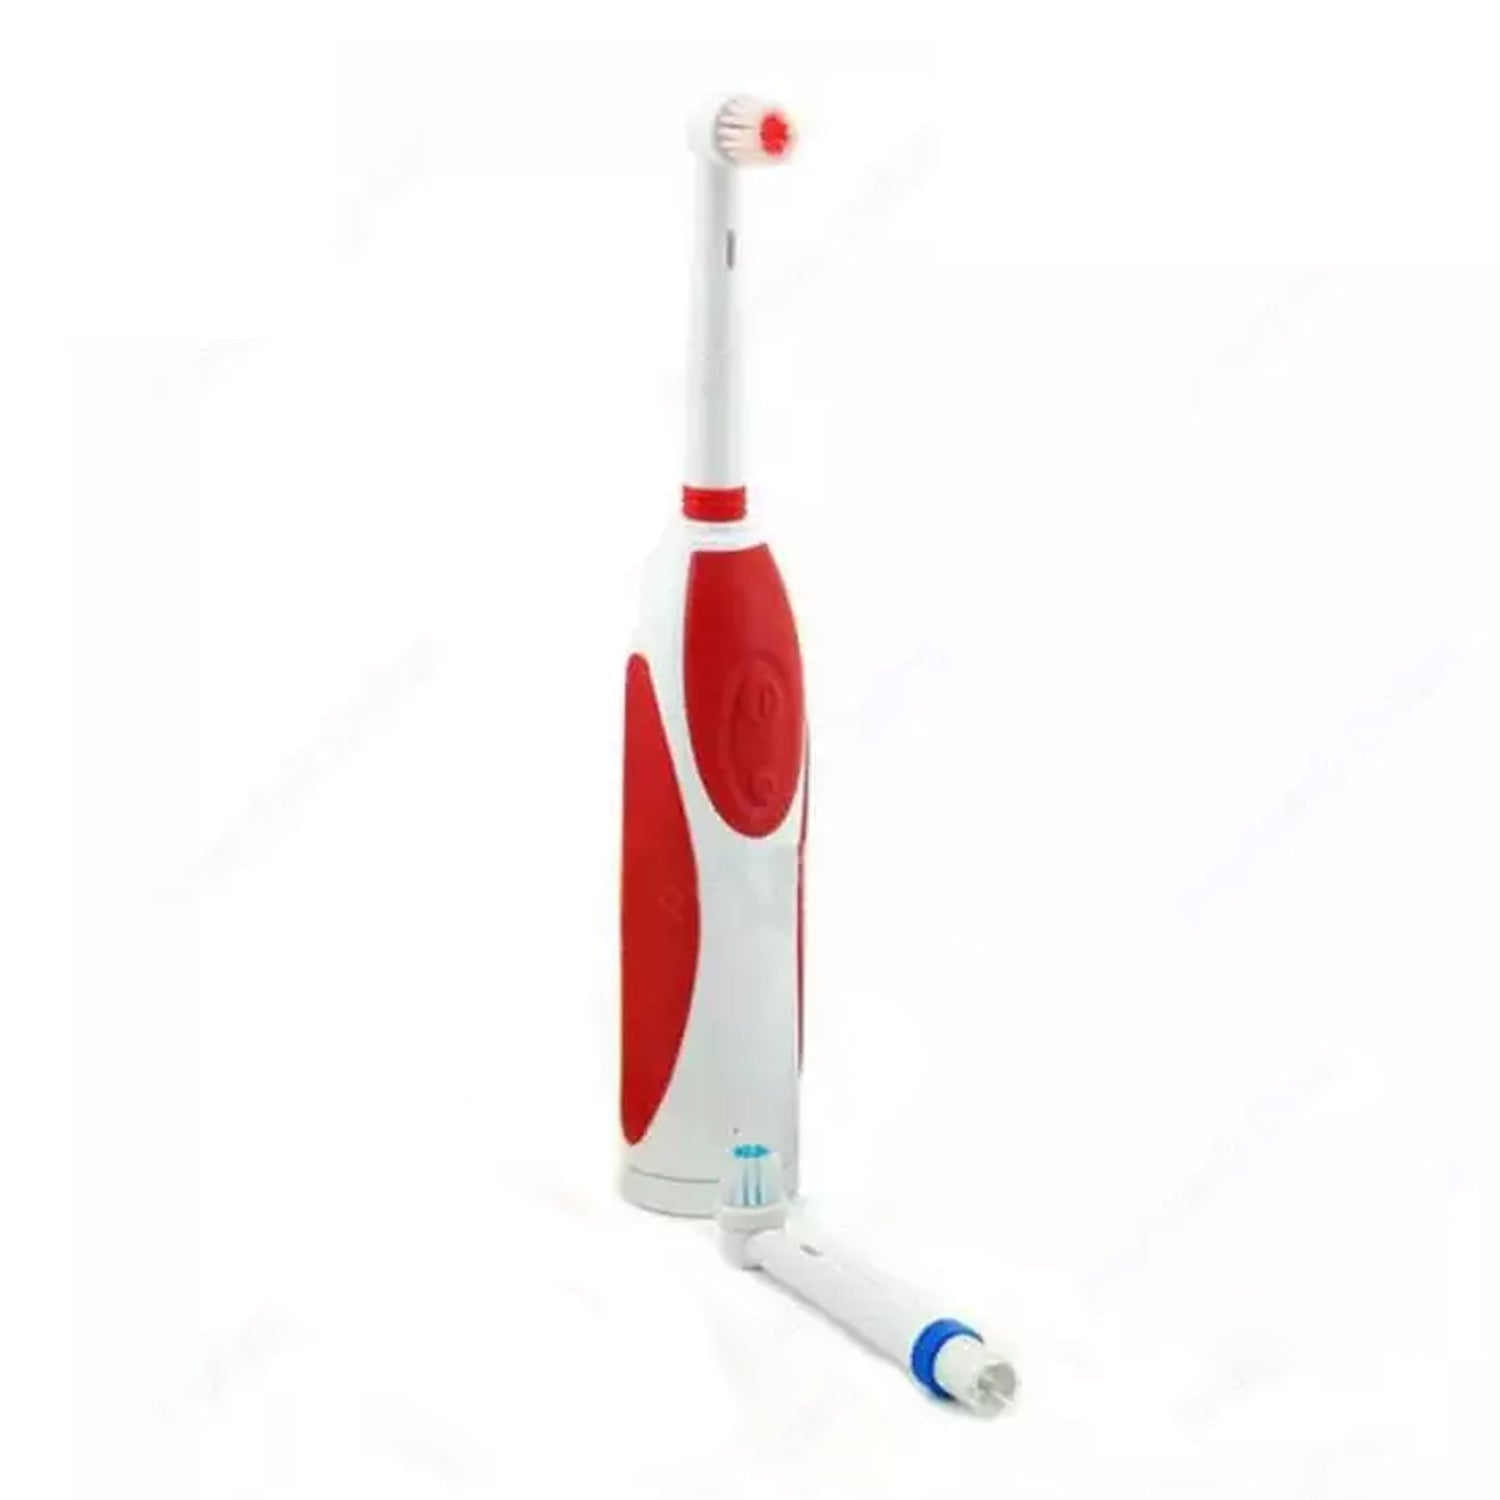 6209 Electric Toothbrush for Adults and Teens, Electric Toothbrush Battery Operated Deep Cleansing Toothbrush.